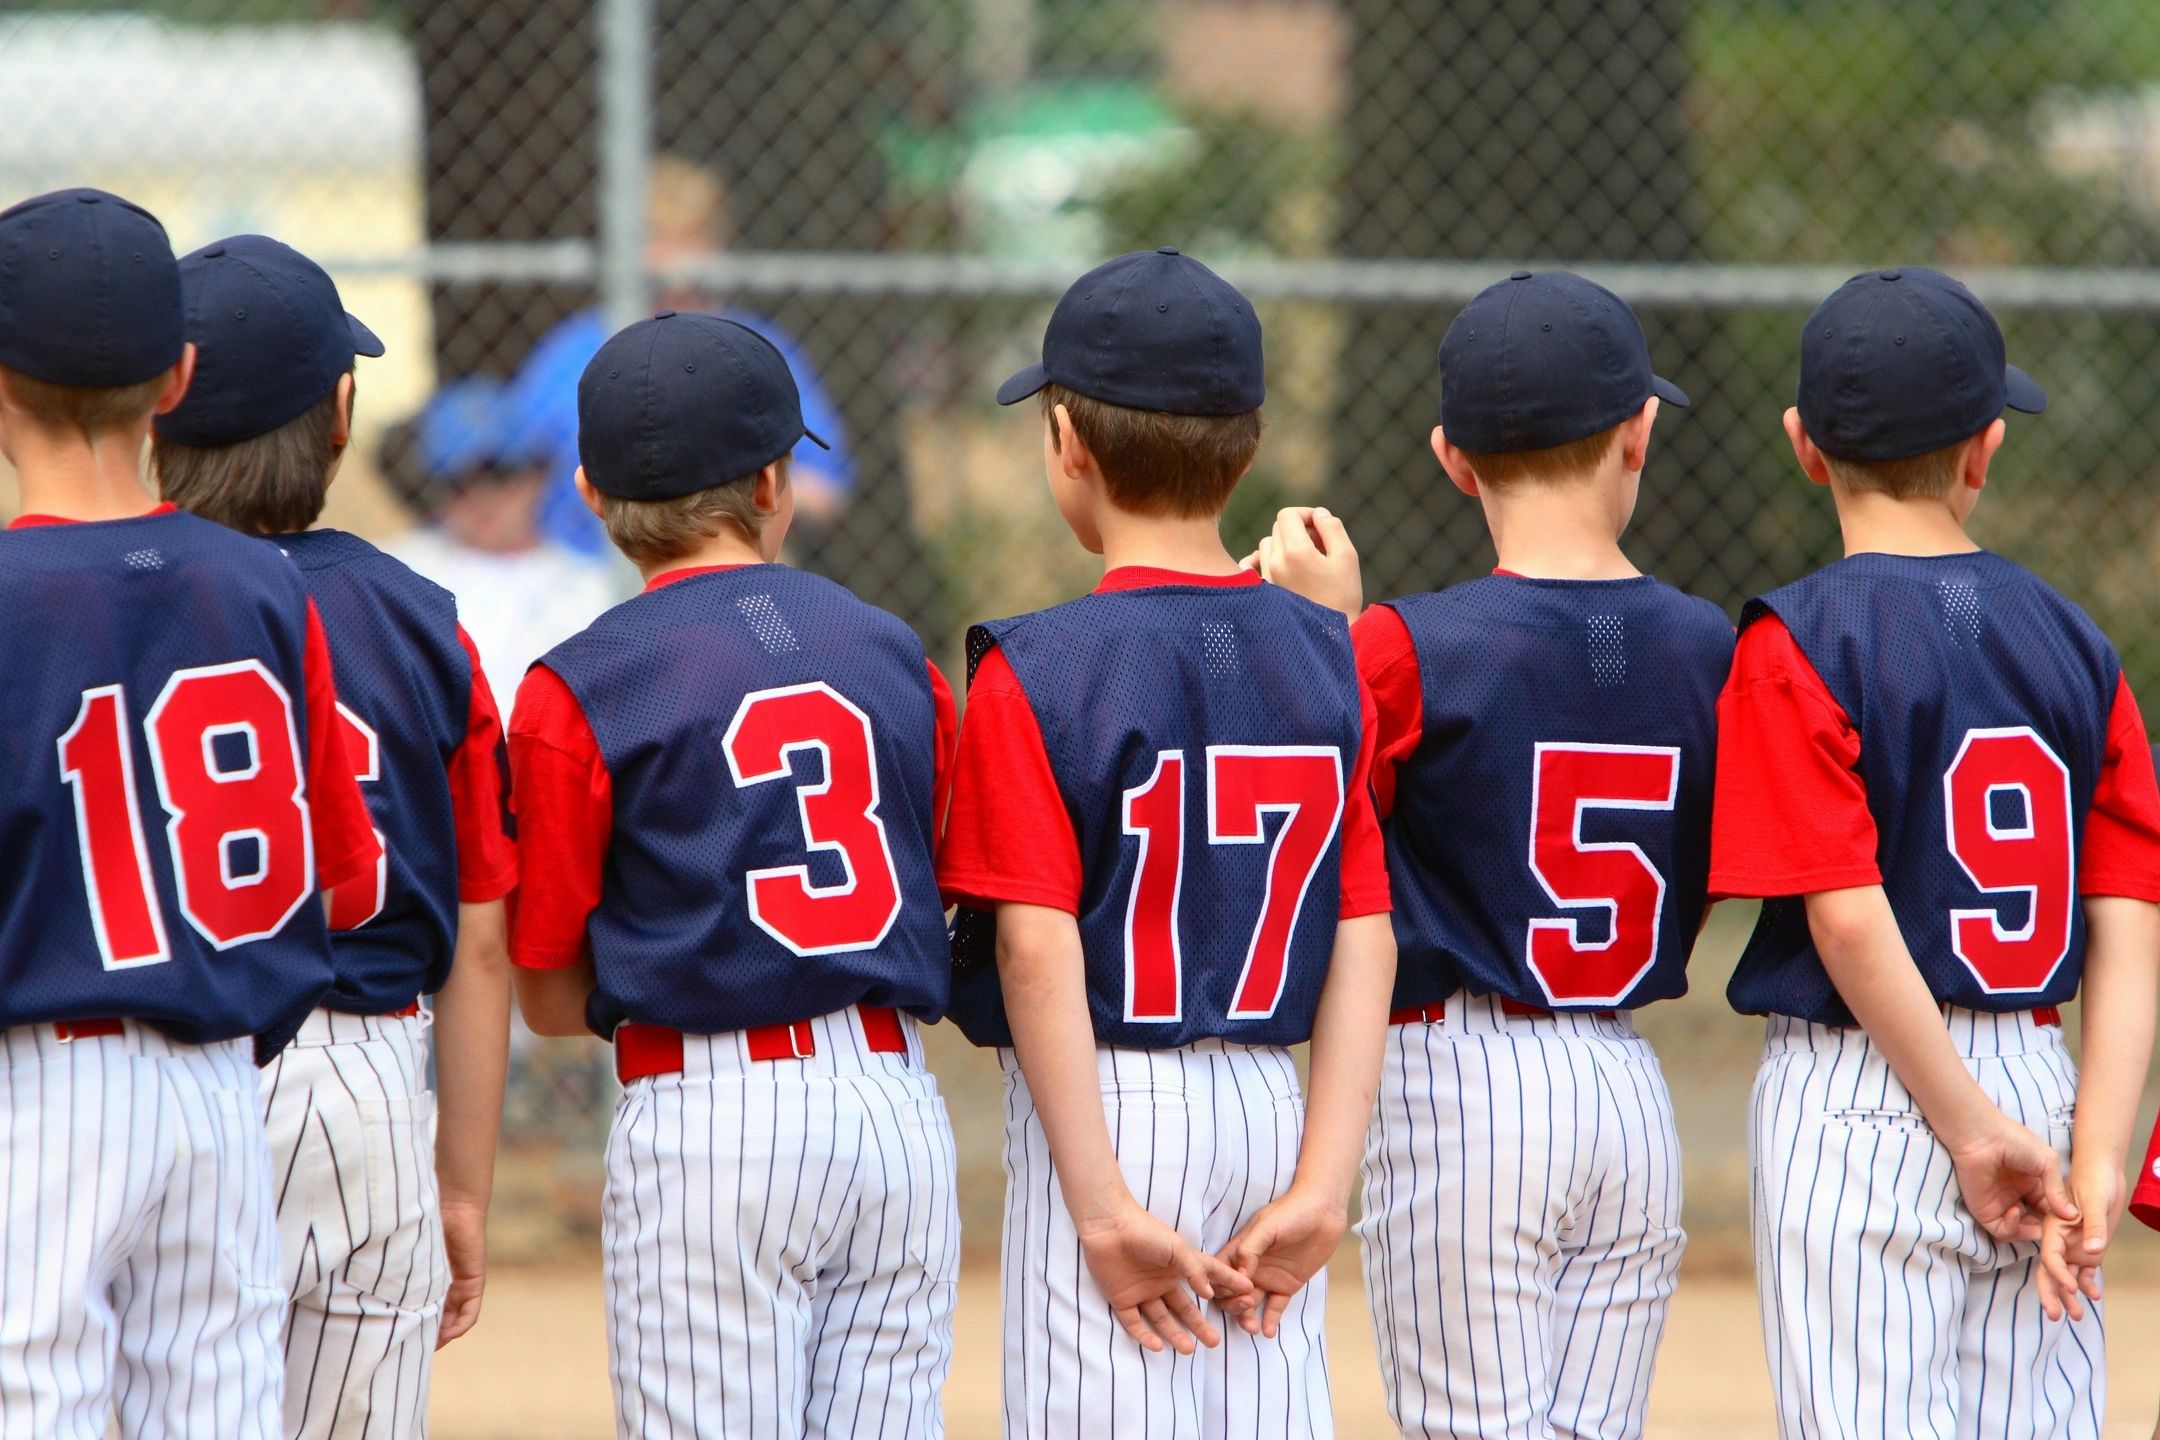 Clifton Little League is the only Little League chartered youth baseball program serving Clifton, NJ